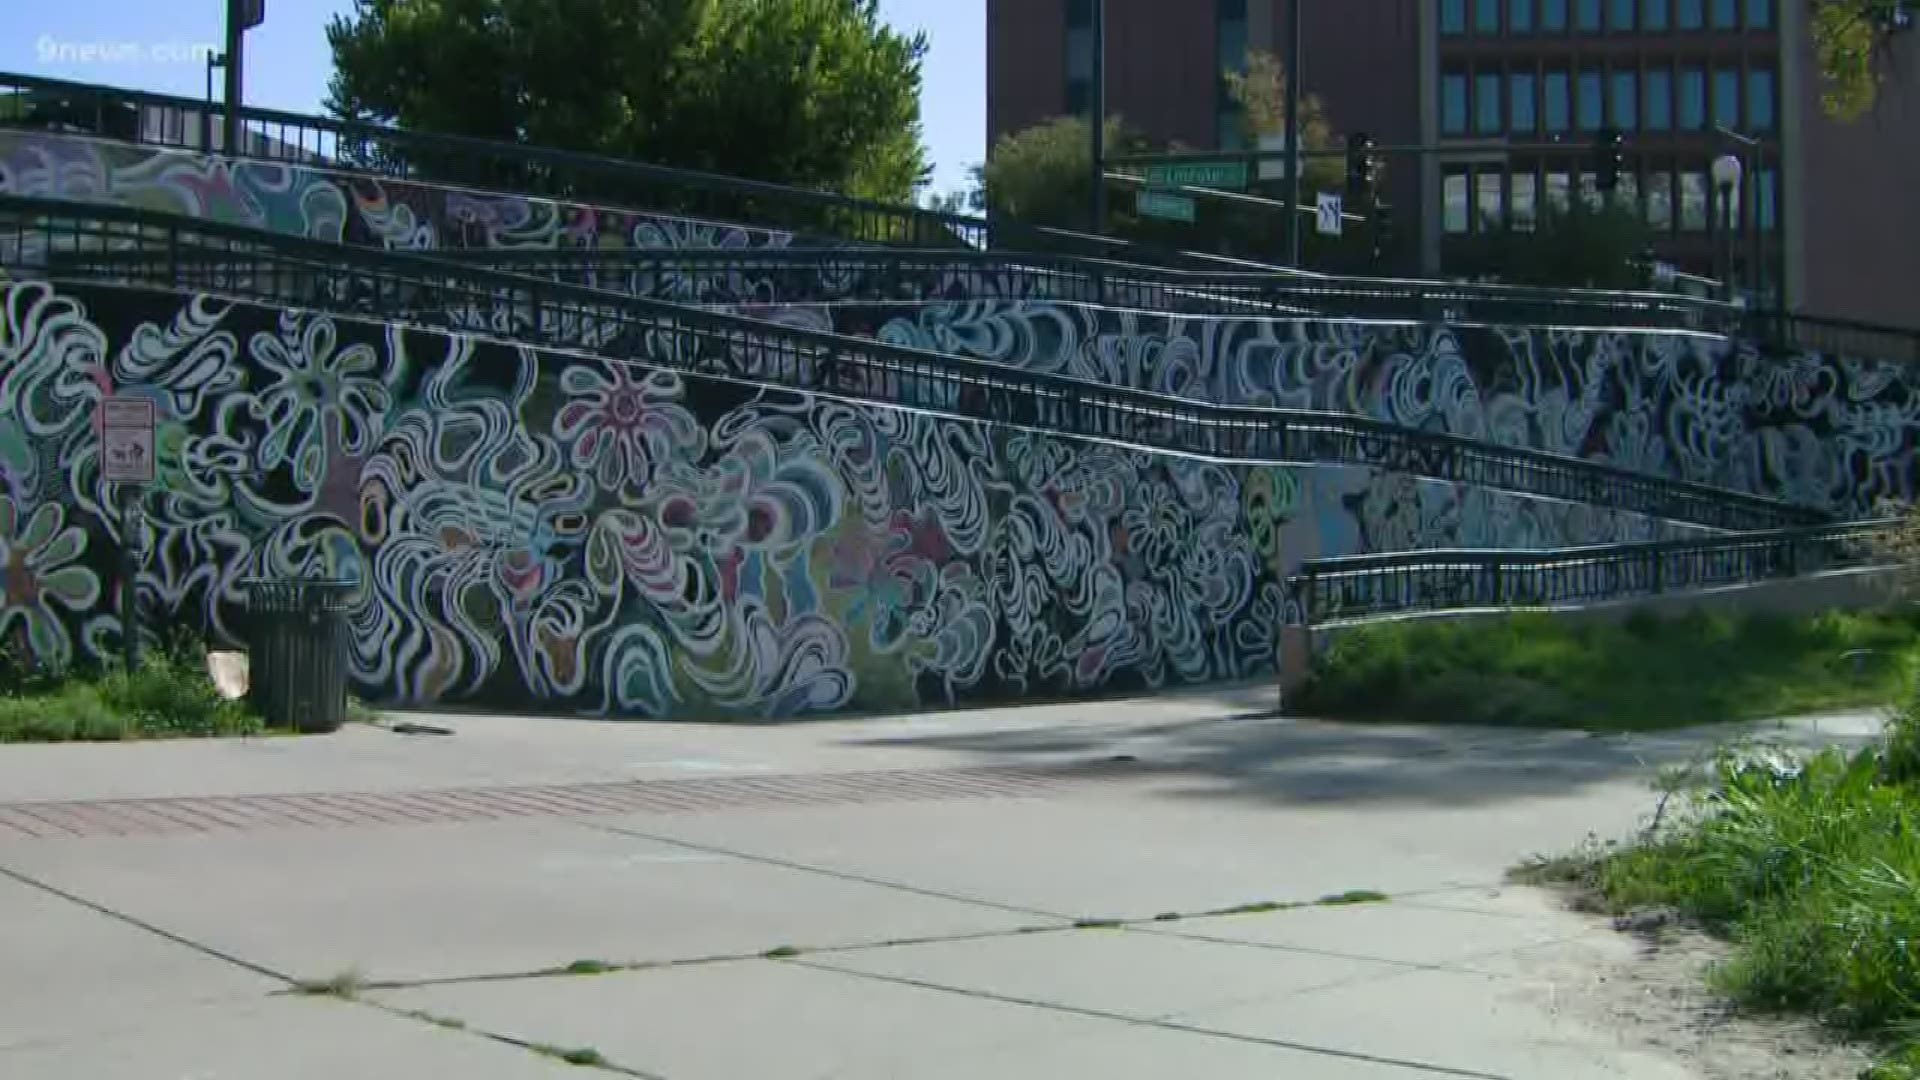 Markus Puskar painted the mural along the Cherry Creek bike path in all black and white. Passersby can color on it with chalk.